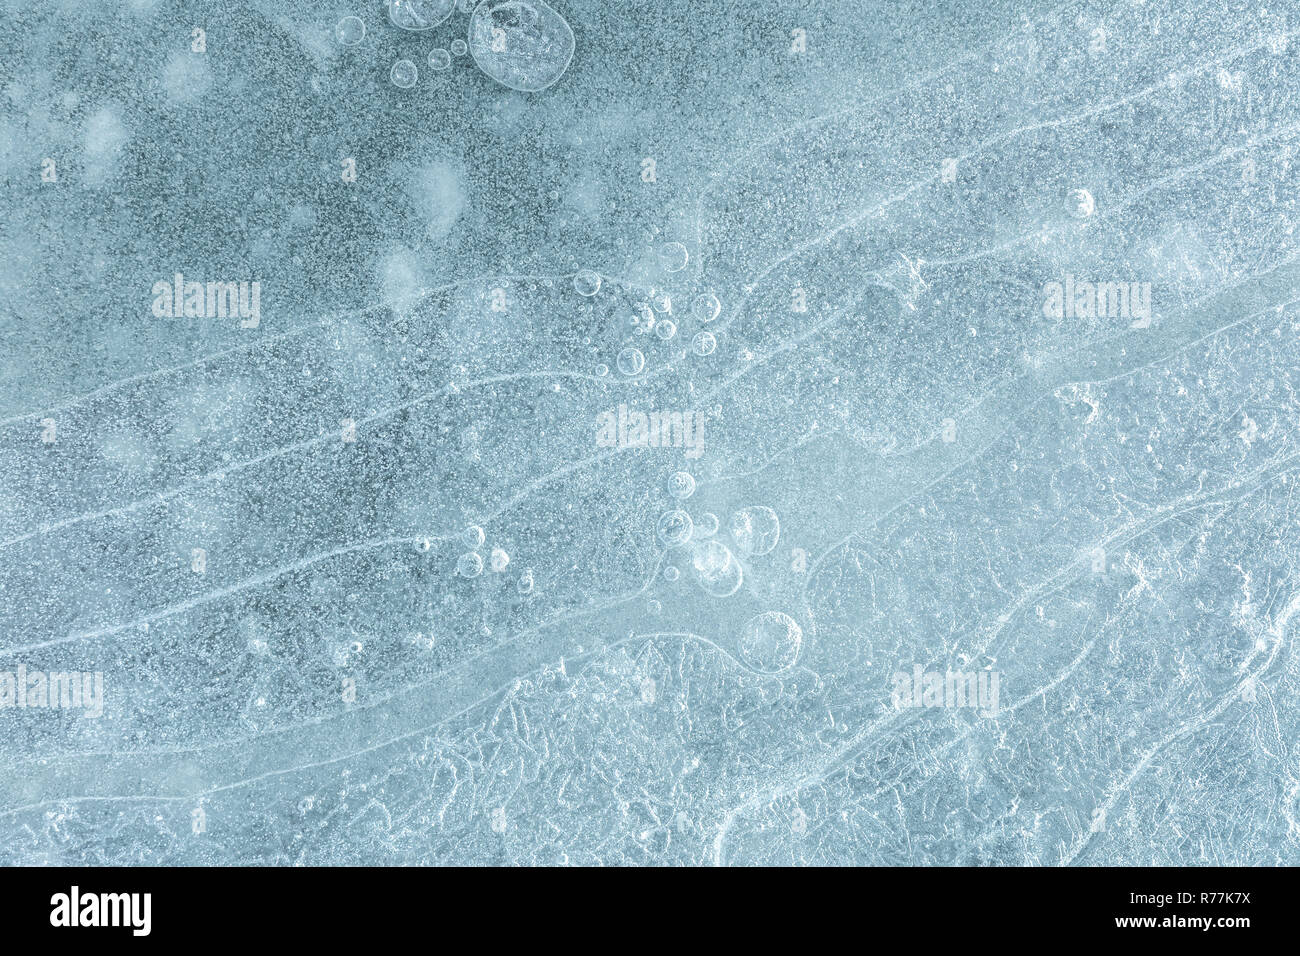 Cracked surface patterns of frozen water surface. Natural winter texture Stock Photo